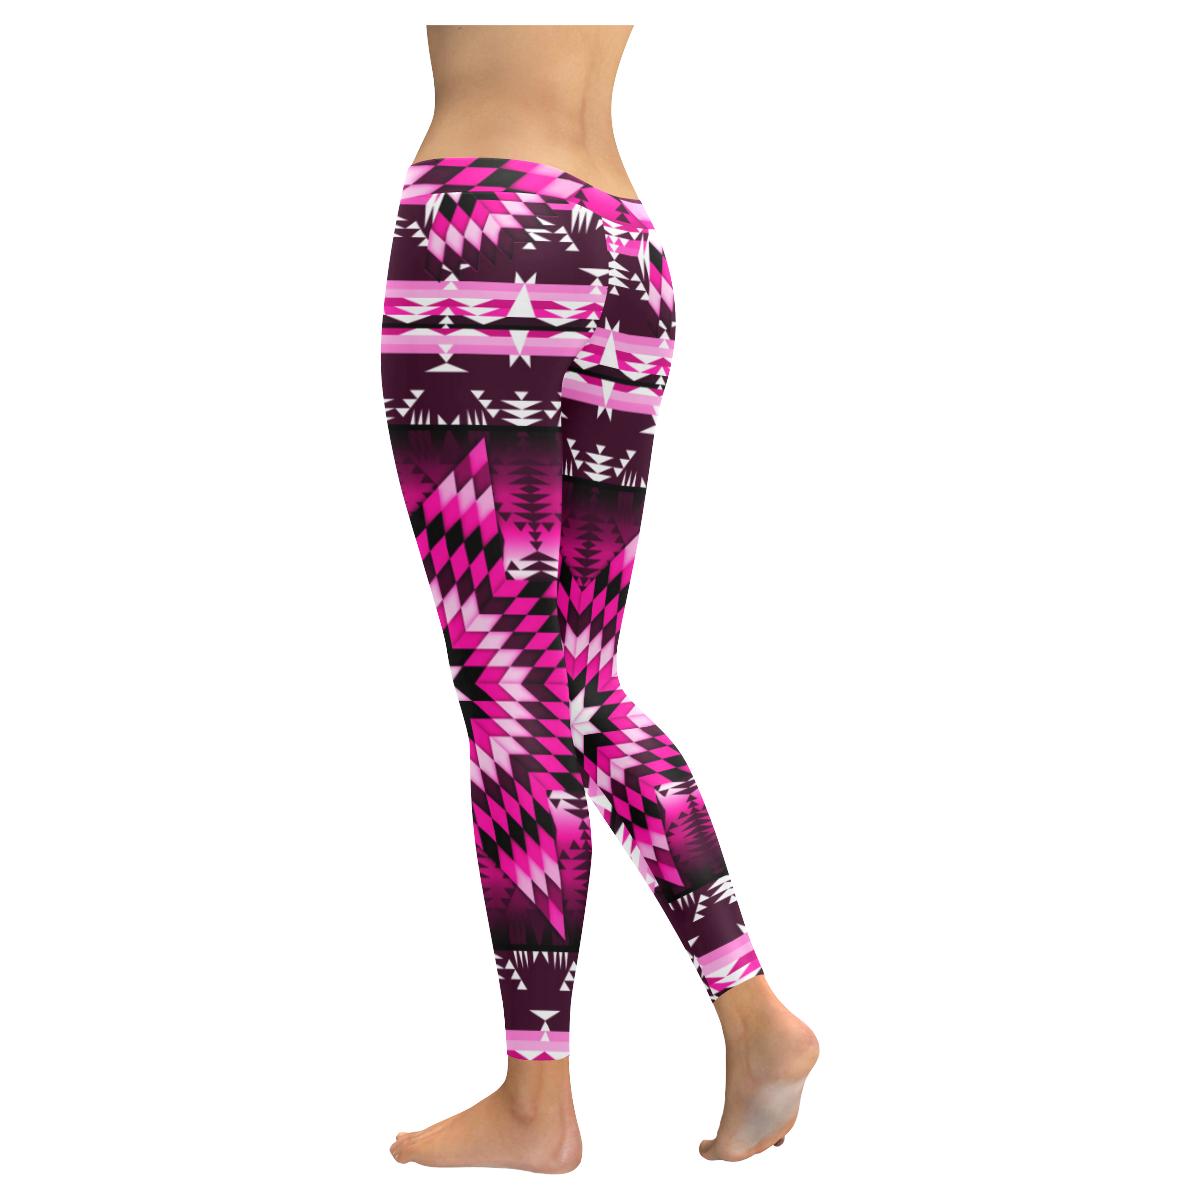 Berry Star Low Rise Leggings (Invisible Stitch) (Model L05) Low Rise Leggings (Invisible Stitch) (L05) e-joyer 